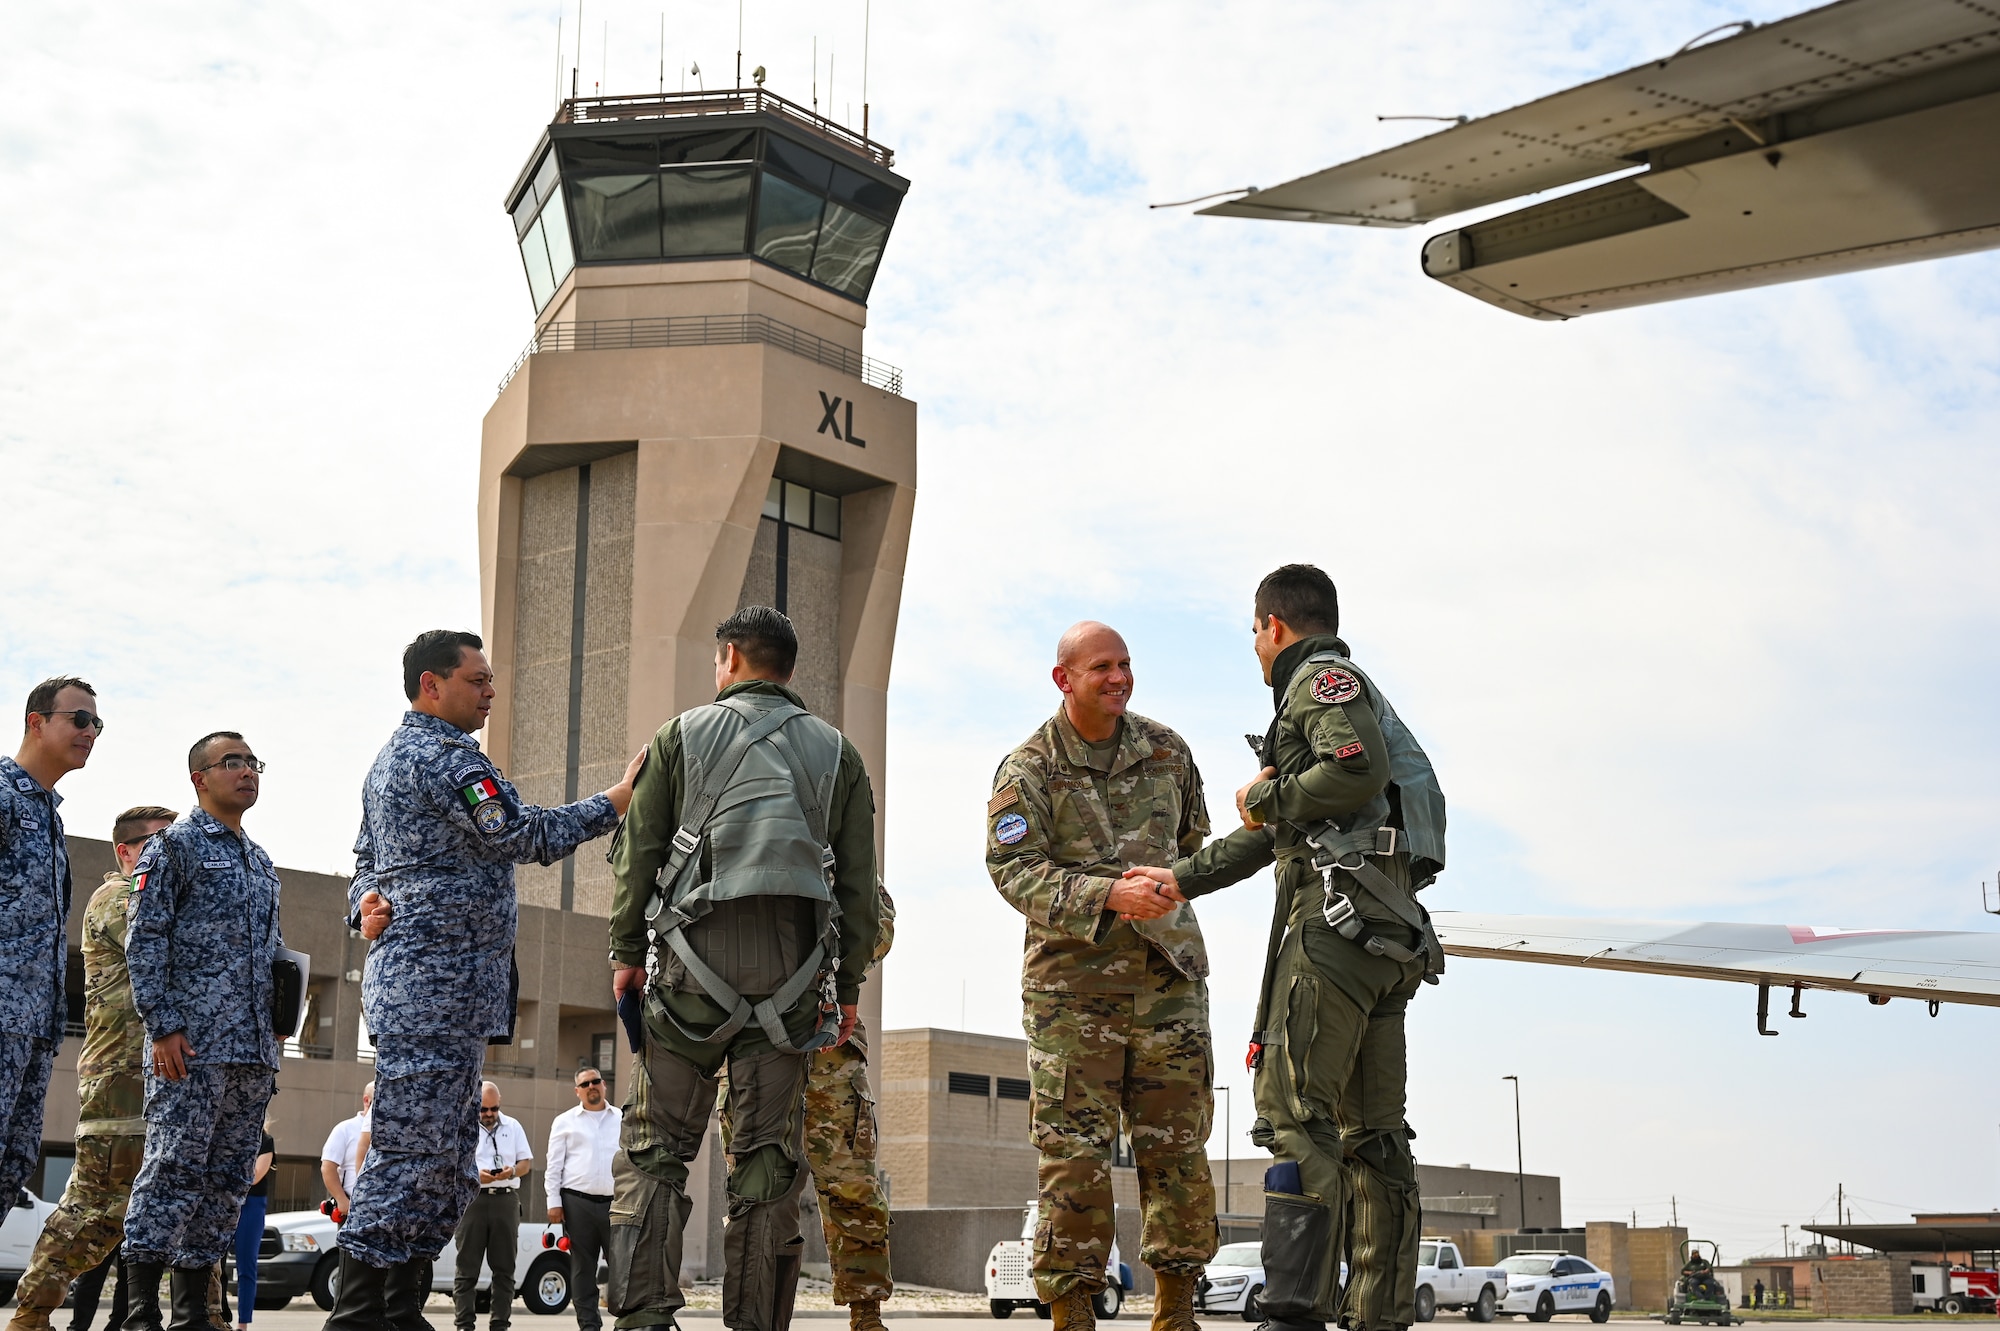 Mexican Air Force visits Laughlin for Fiesta of Flight